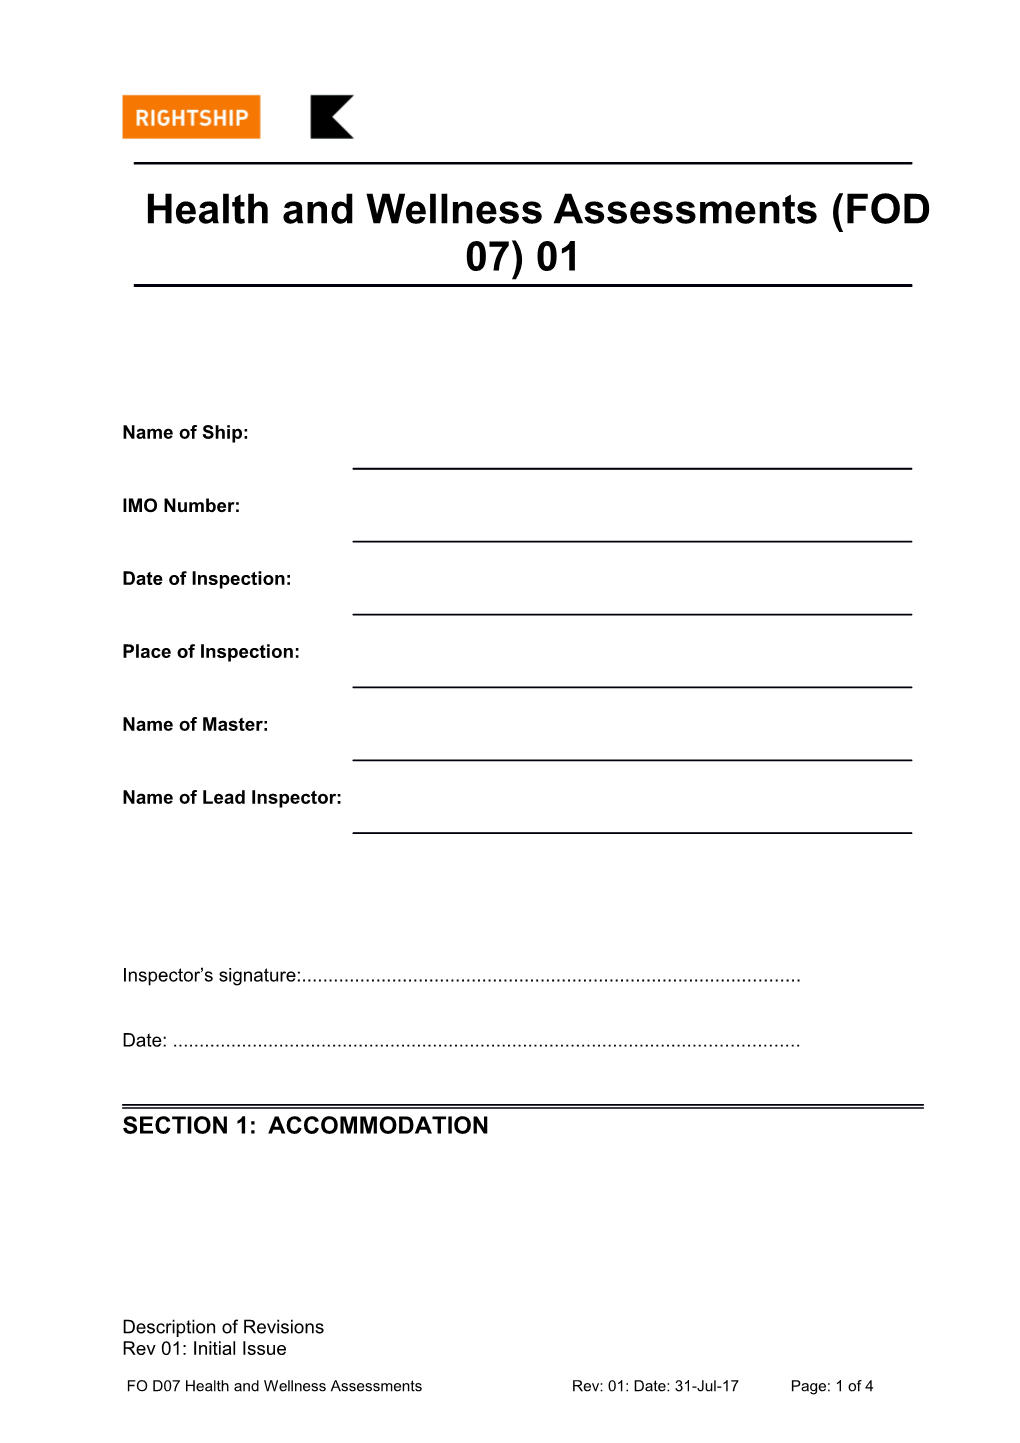 FO D07 Health and Wellness Assessments Rev 01